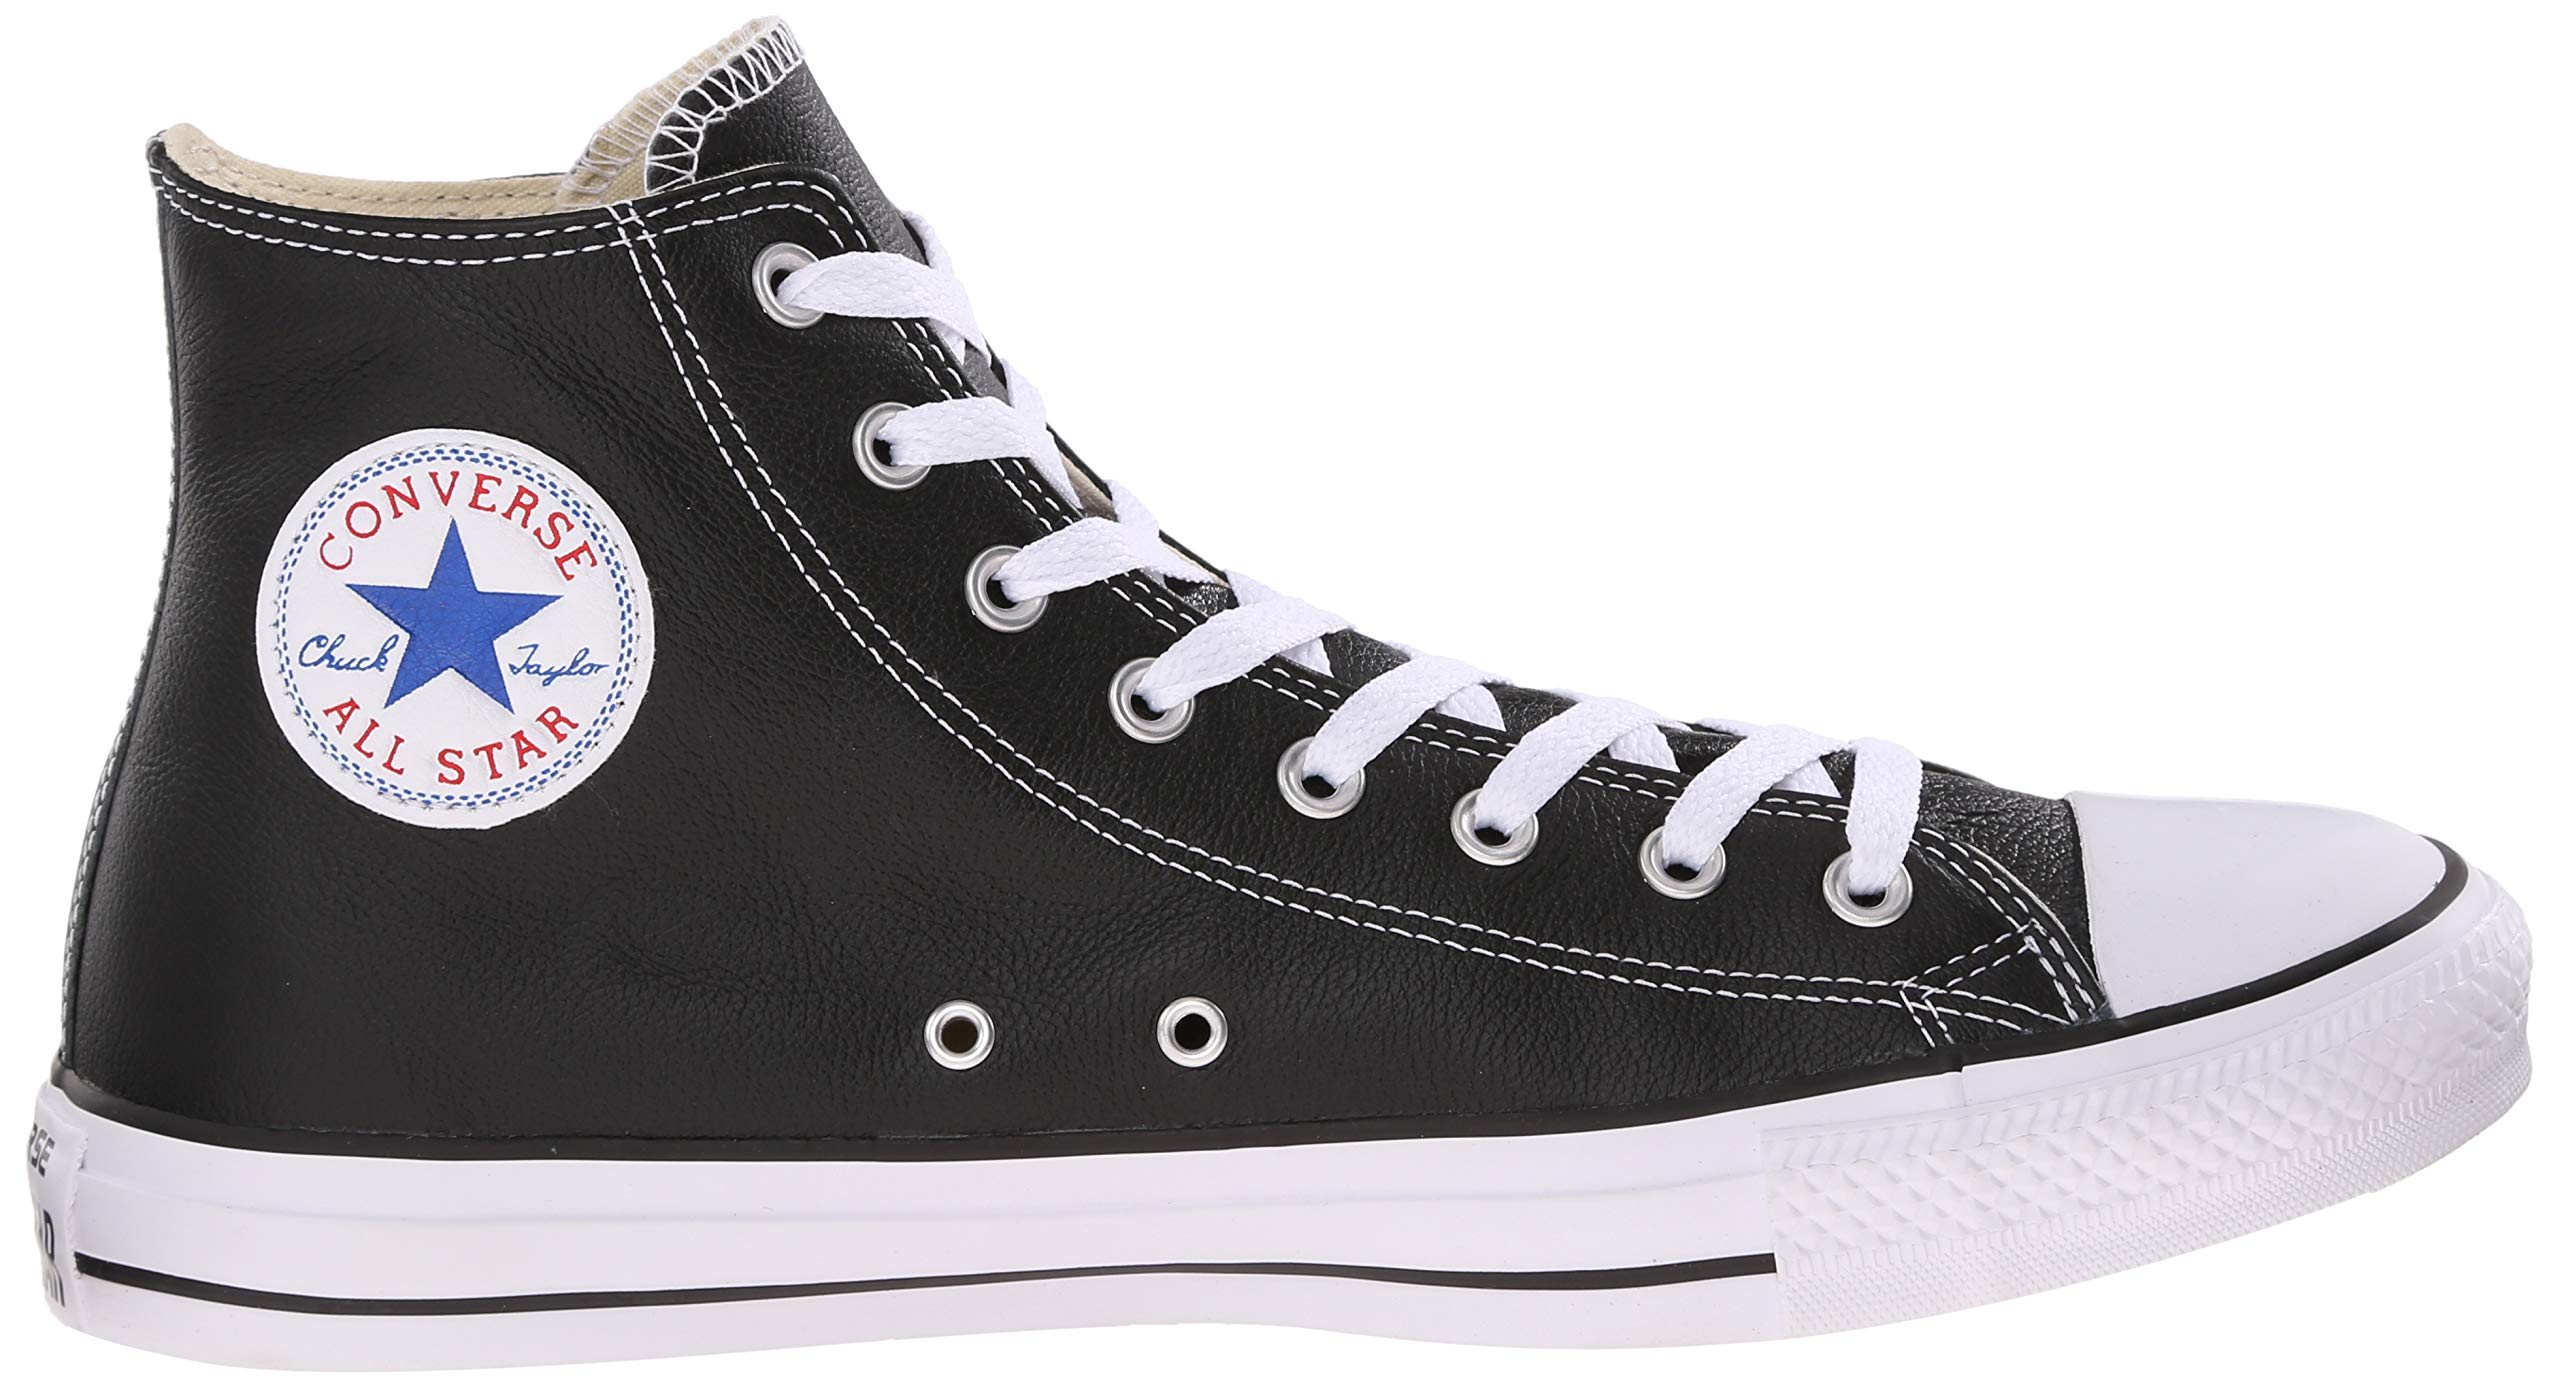 Converse Chuck Taylor All Star Hi Leather Sneakers Black - image 5 of 8